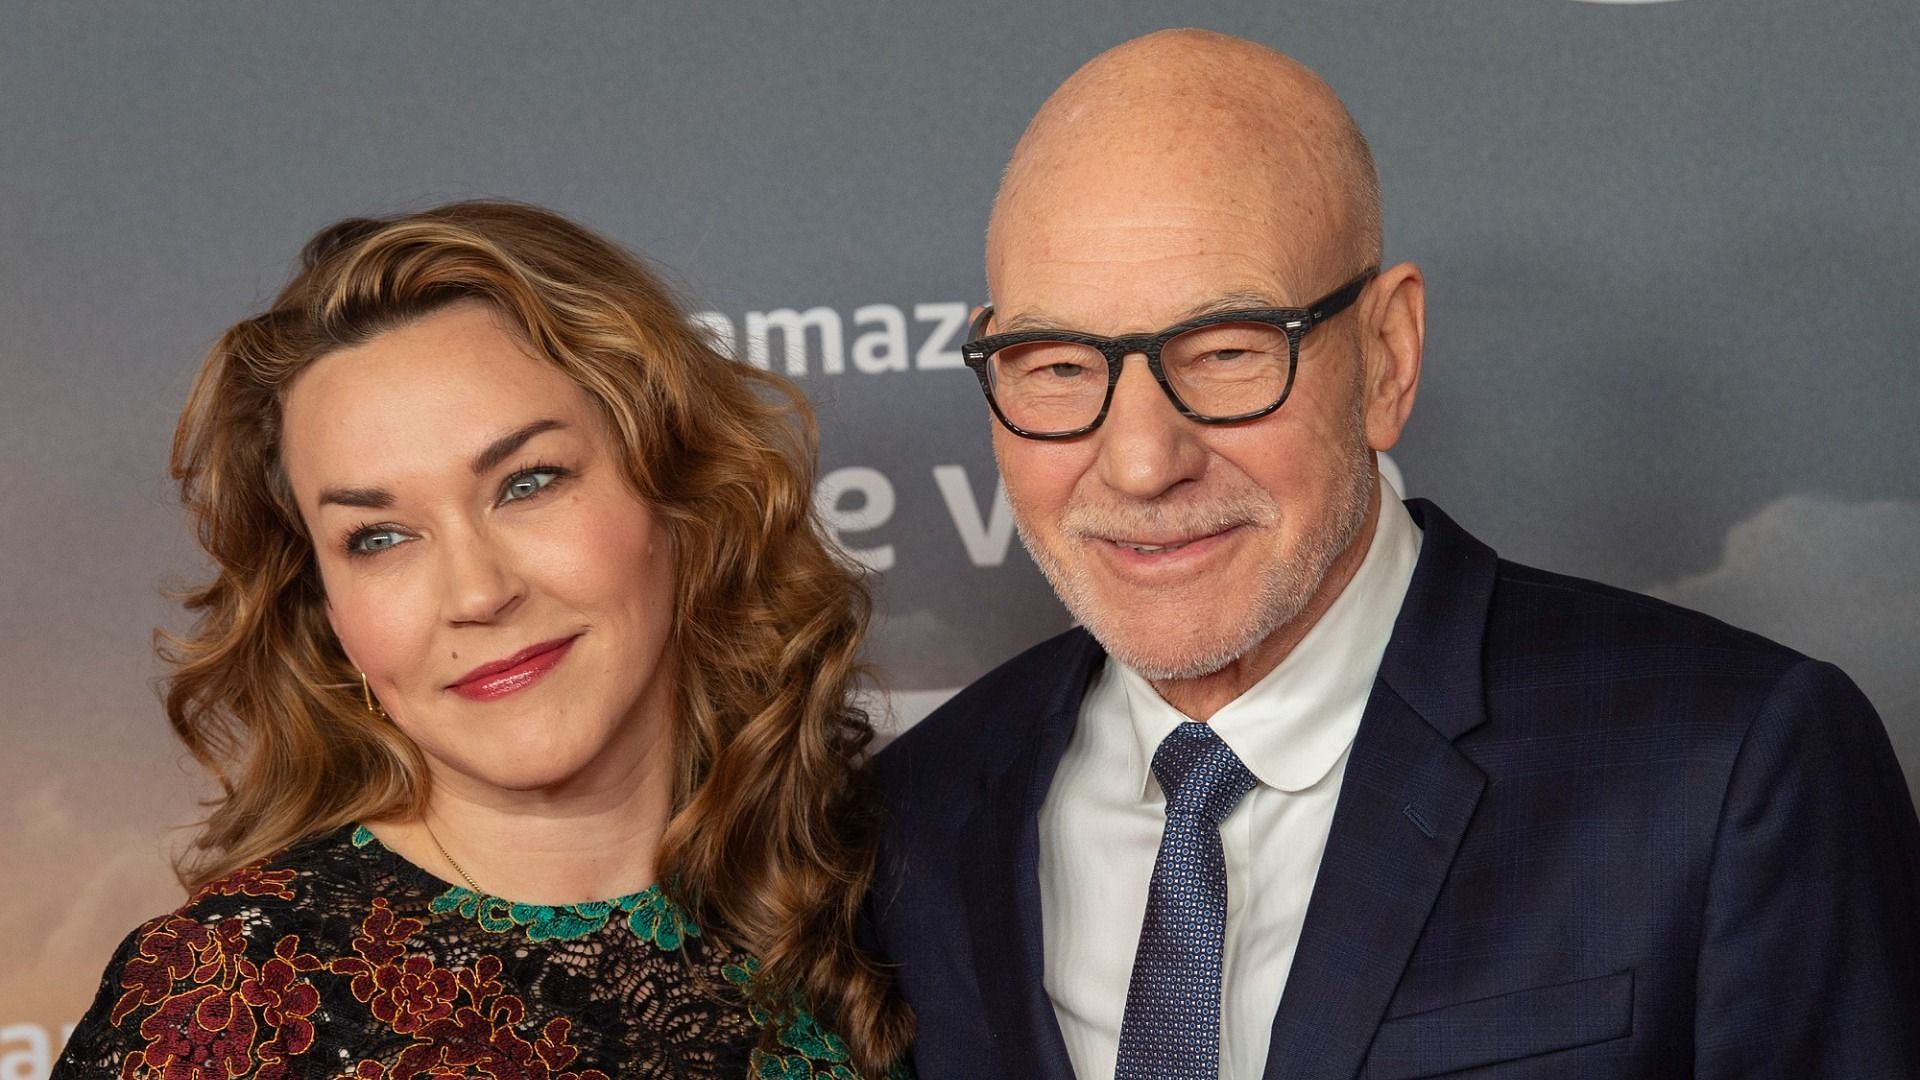 Patrick Stewart and his wife Sunny Ozell (Image via Paul Zinken/Picture Alliance)